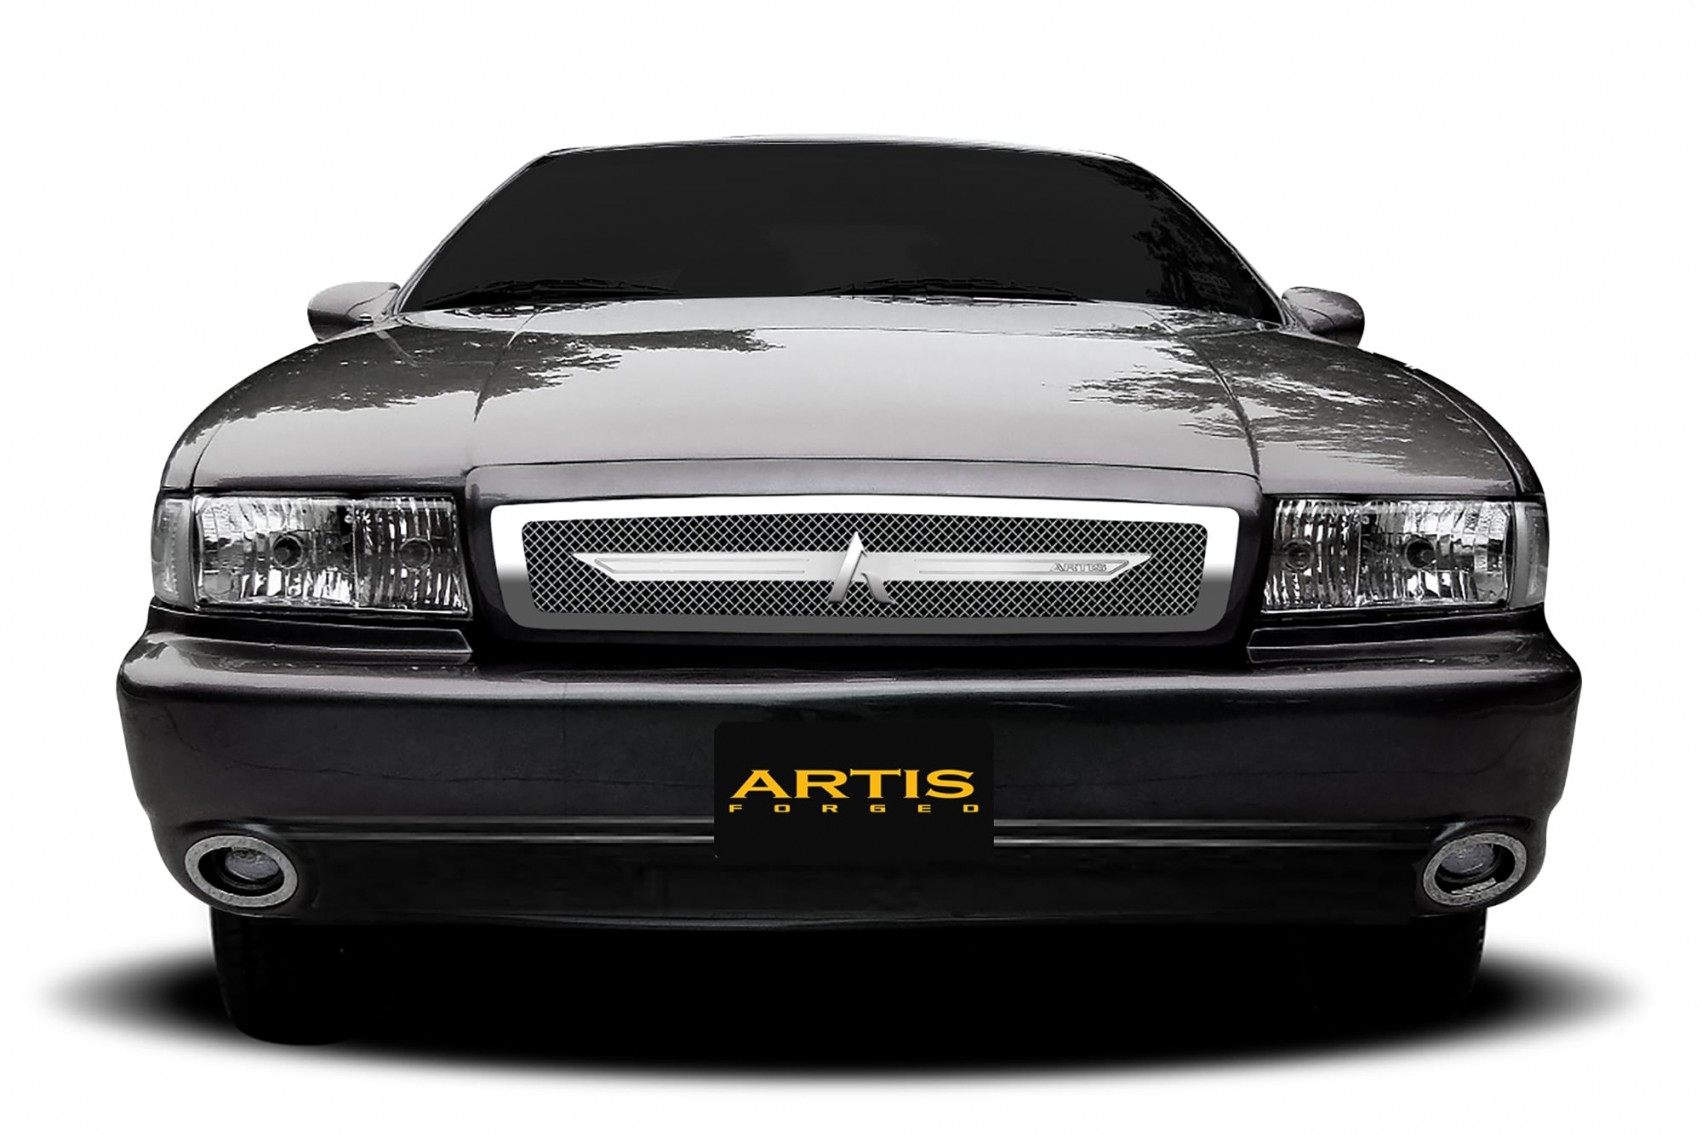 Artis Forged grille for 91Caprice 